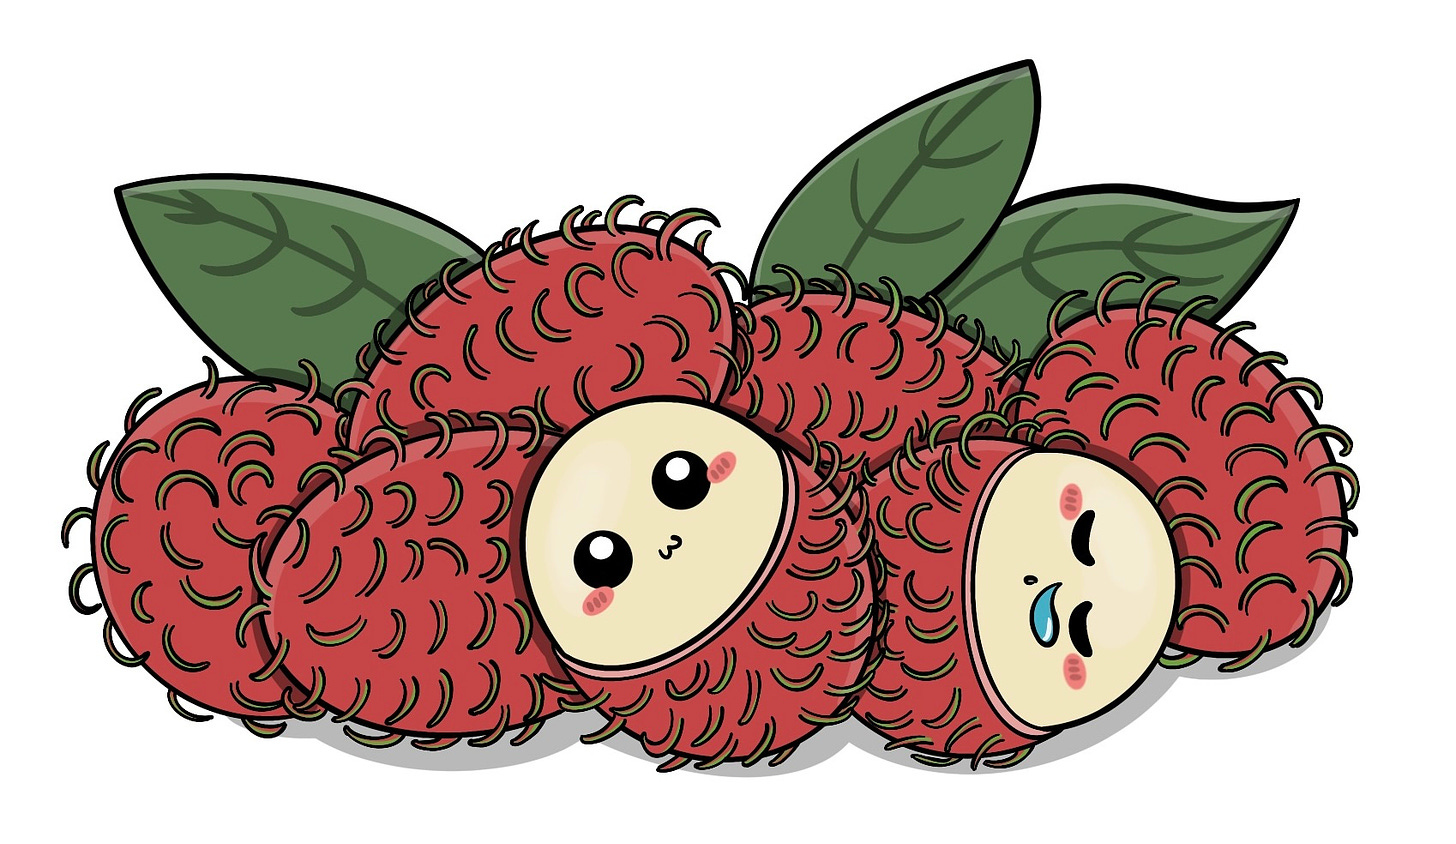 Cartoon illustration of rambutans, some with faces.